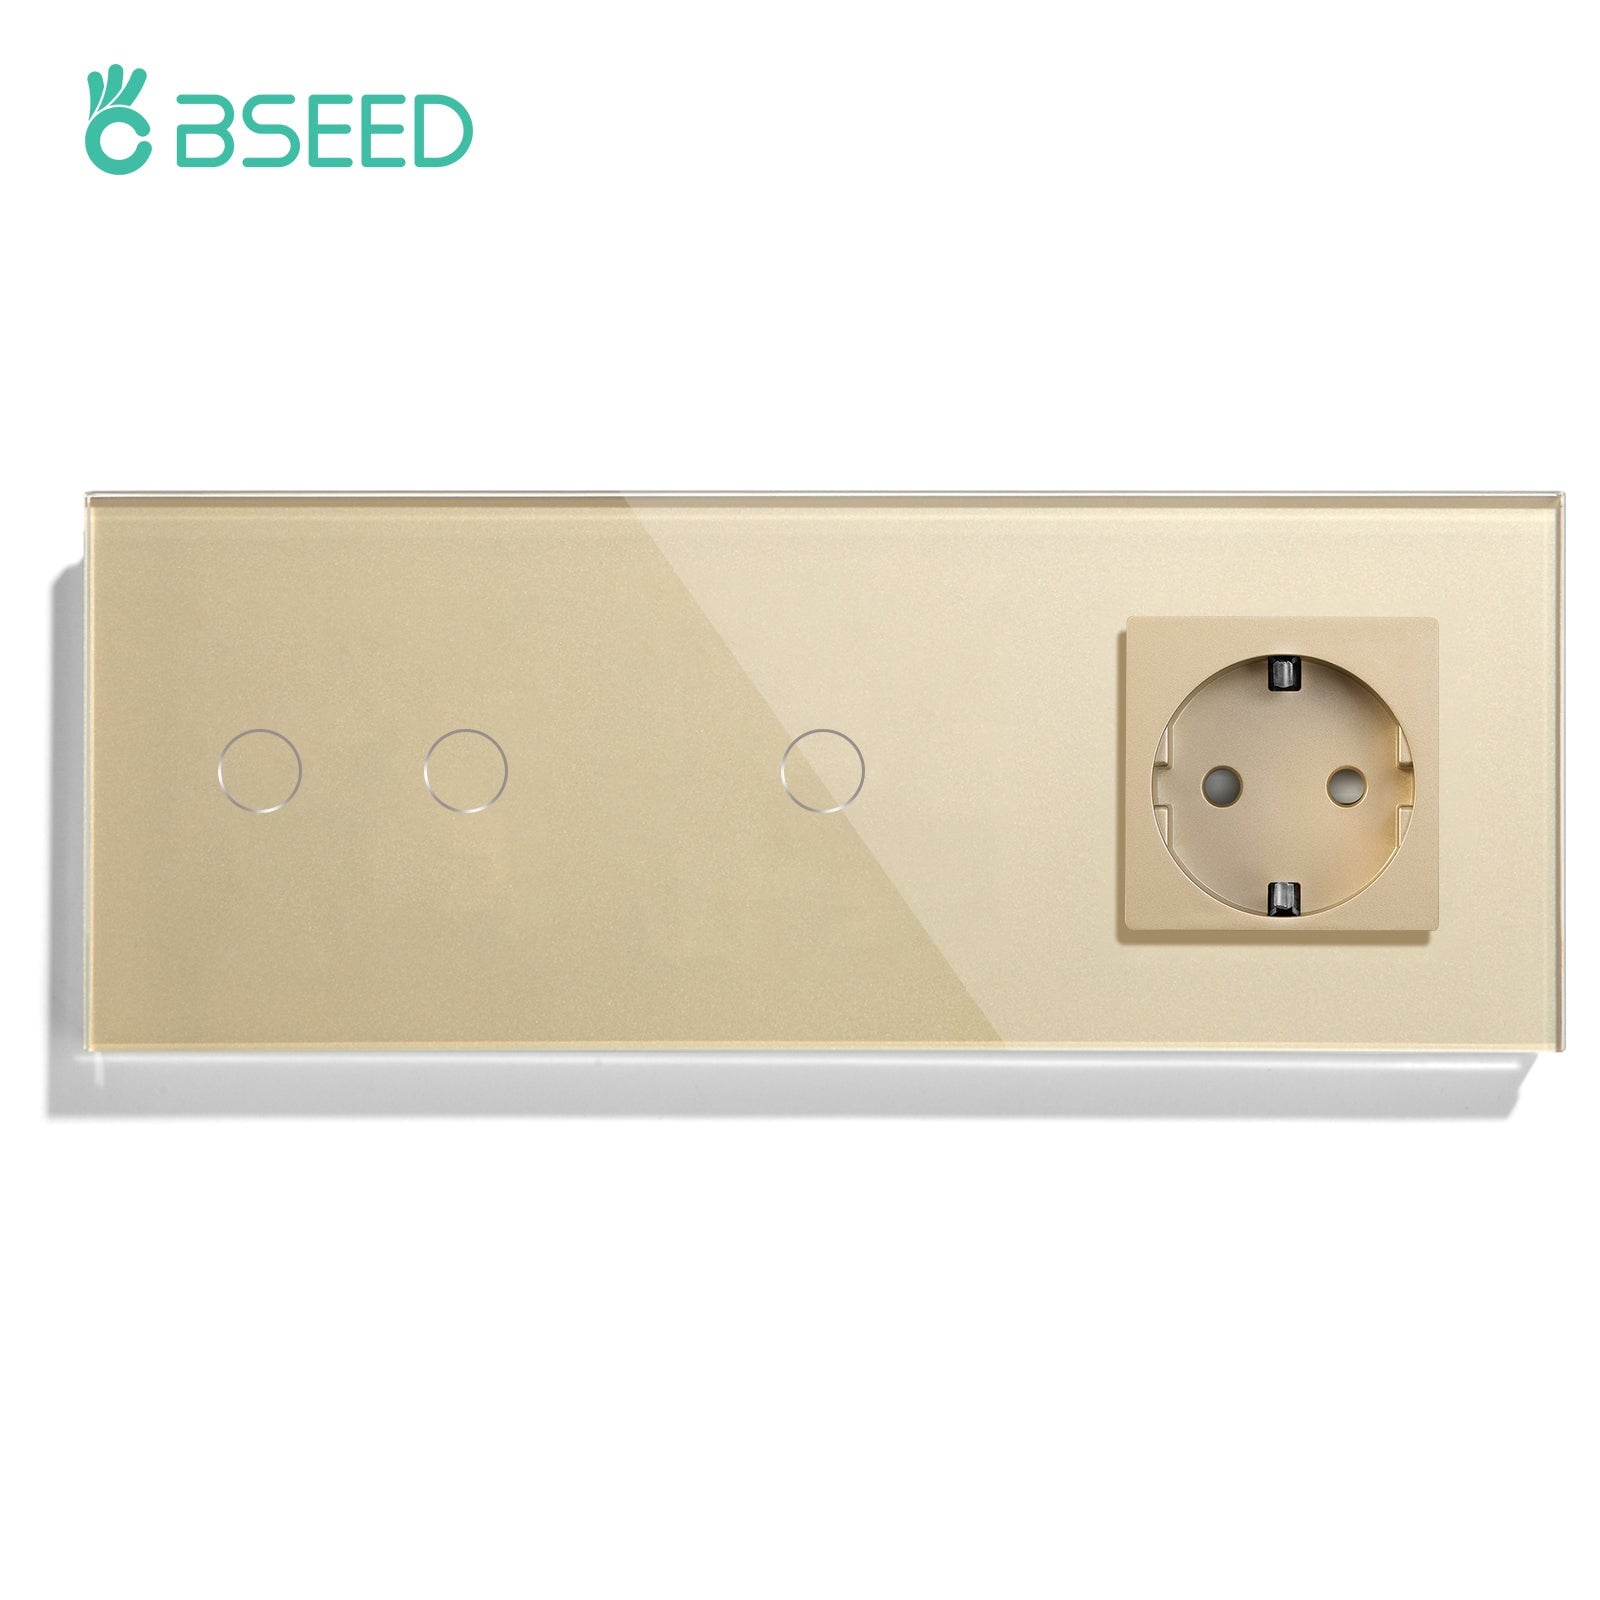 BSEED Double Touch 1/2/3 Gnag 1/2/3 Way Light Switch With EU Socket Power Outlets & Sockets Bseedswitch Golden 2gang+1gang 1Way